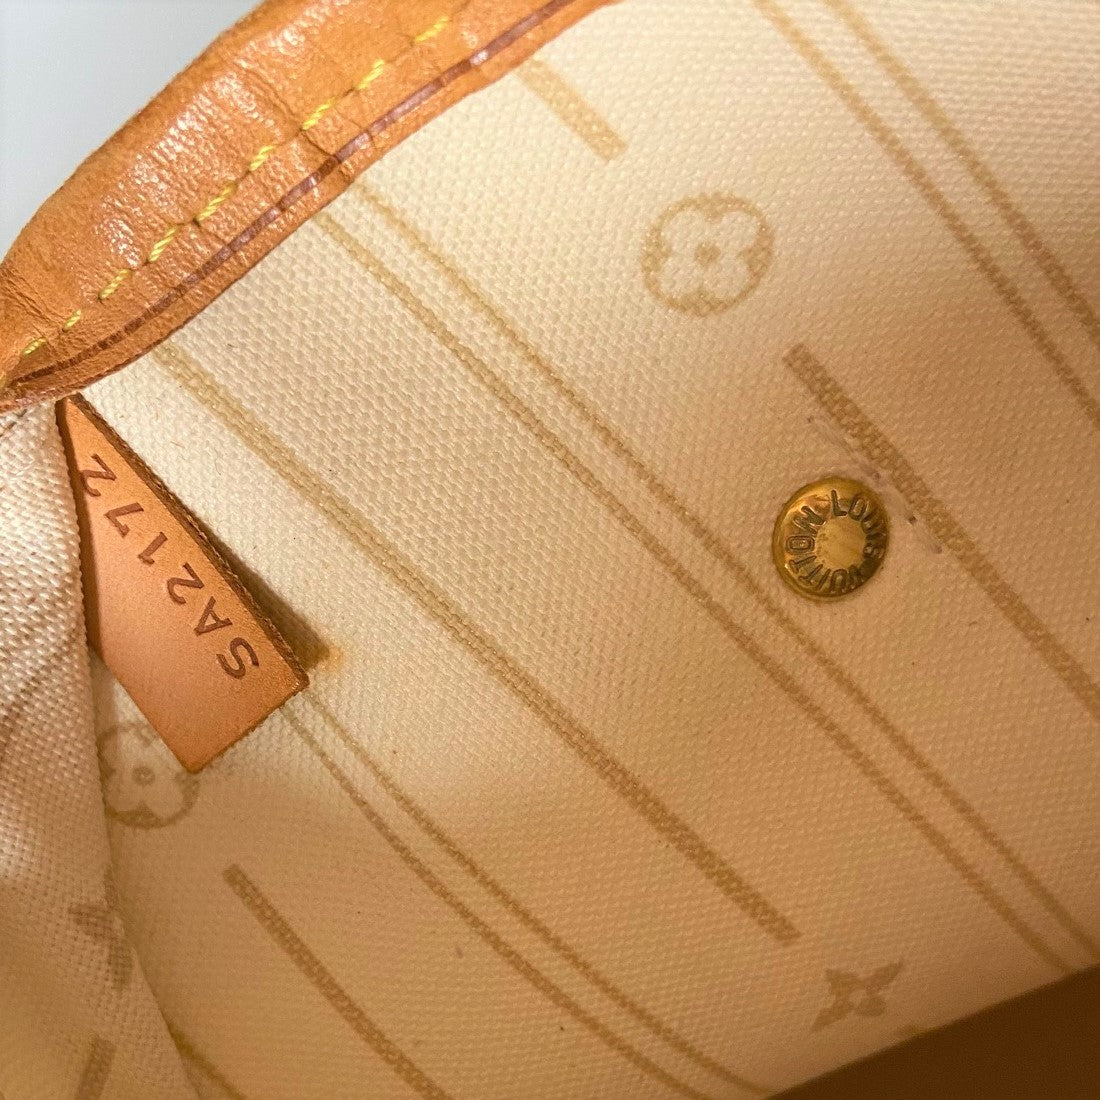 💯 Authentic Louis Vuitton Stardust Collection Neverfull MM